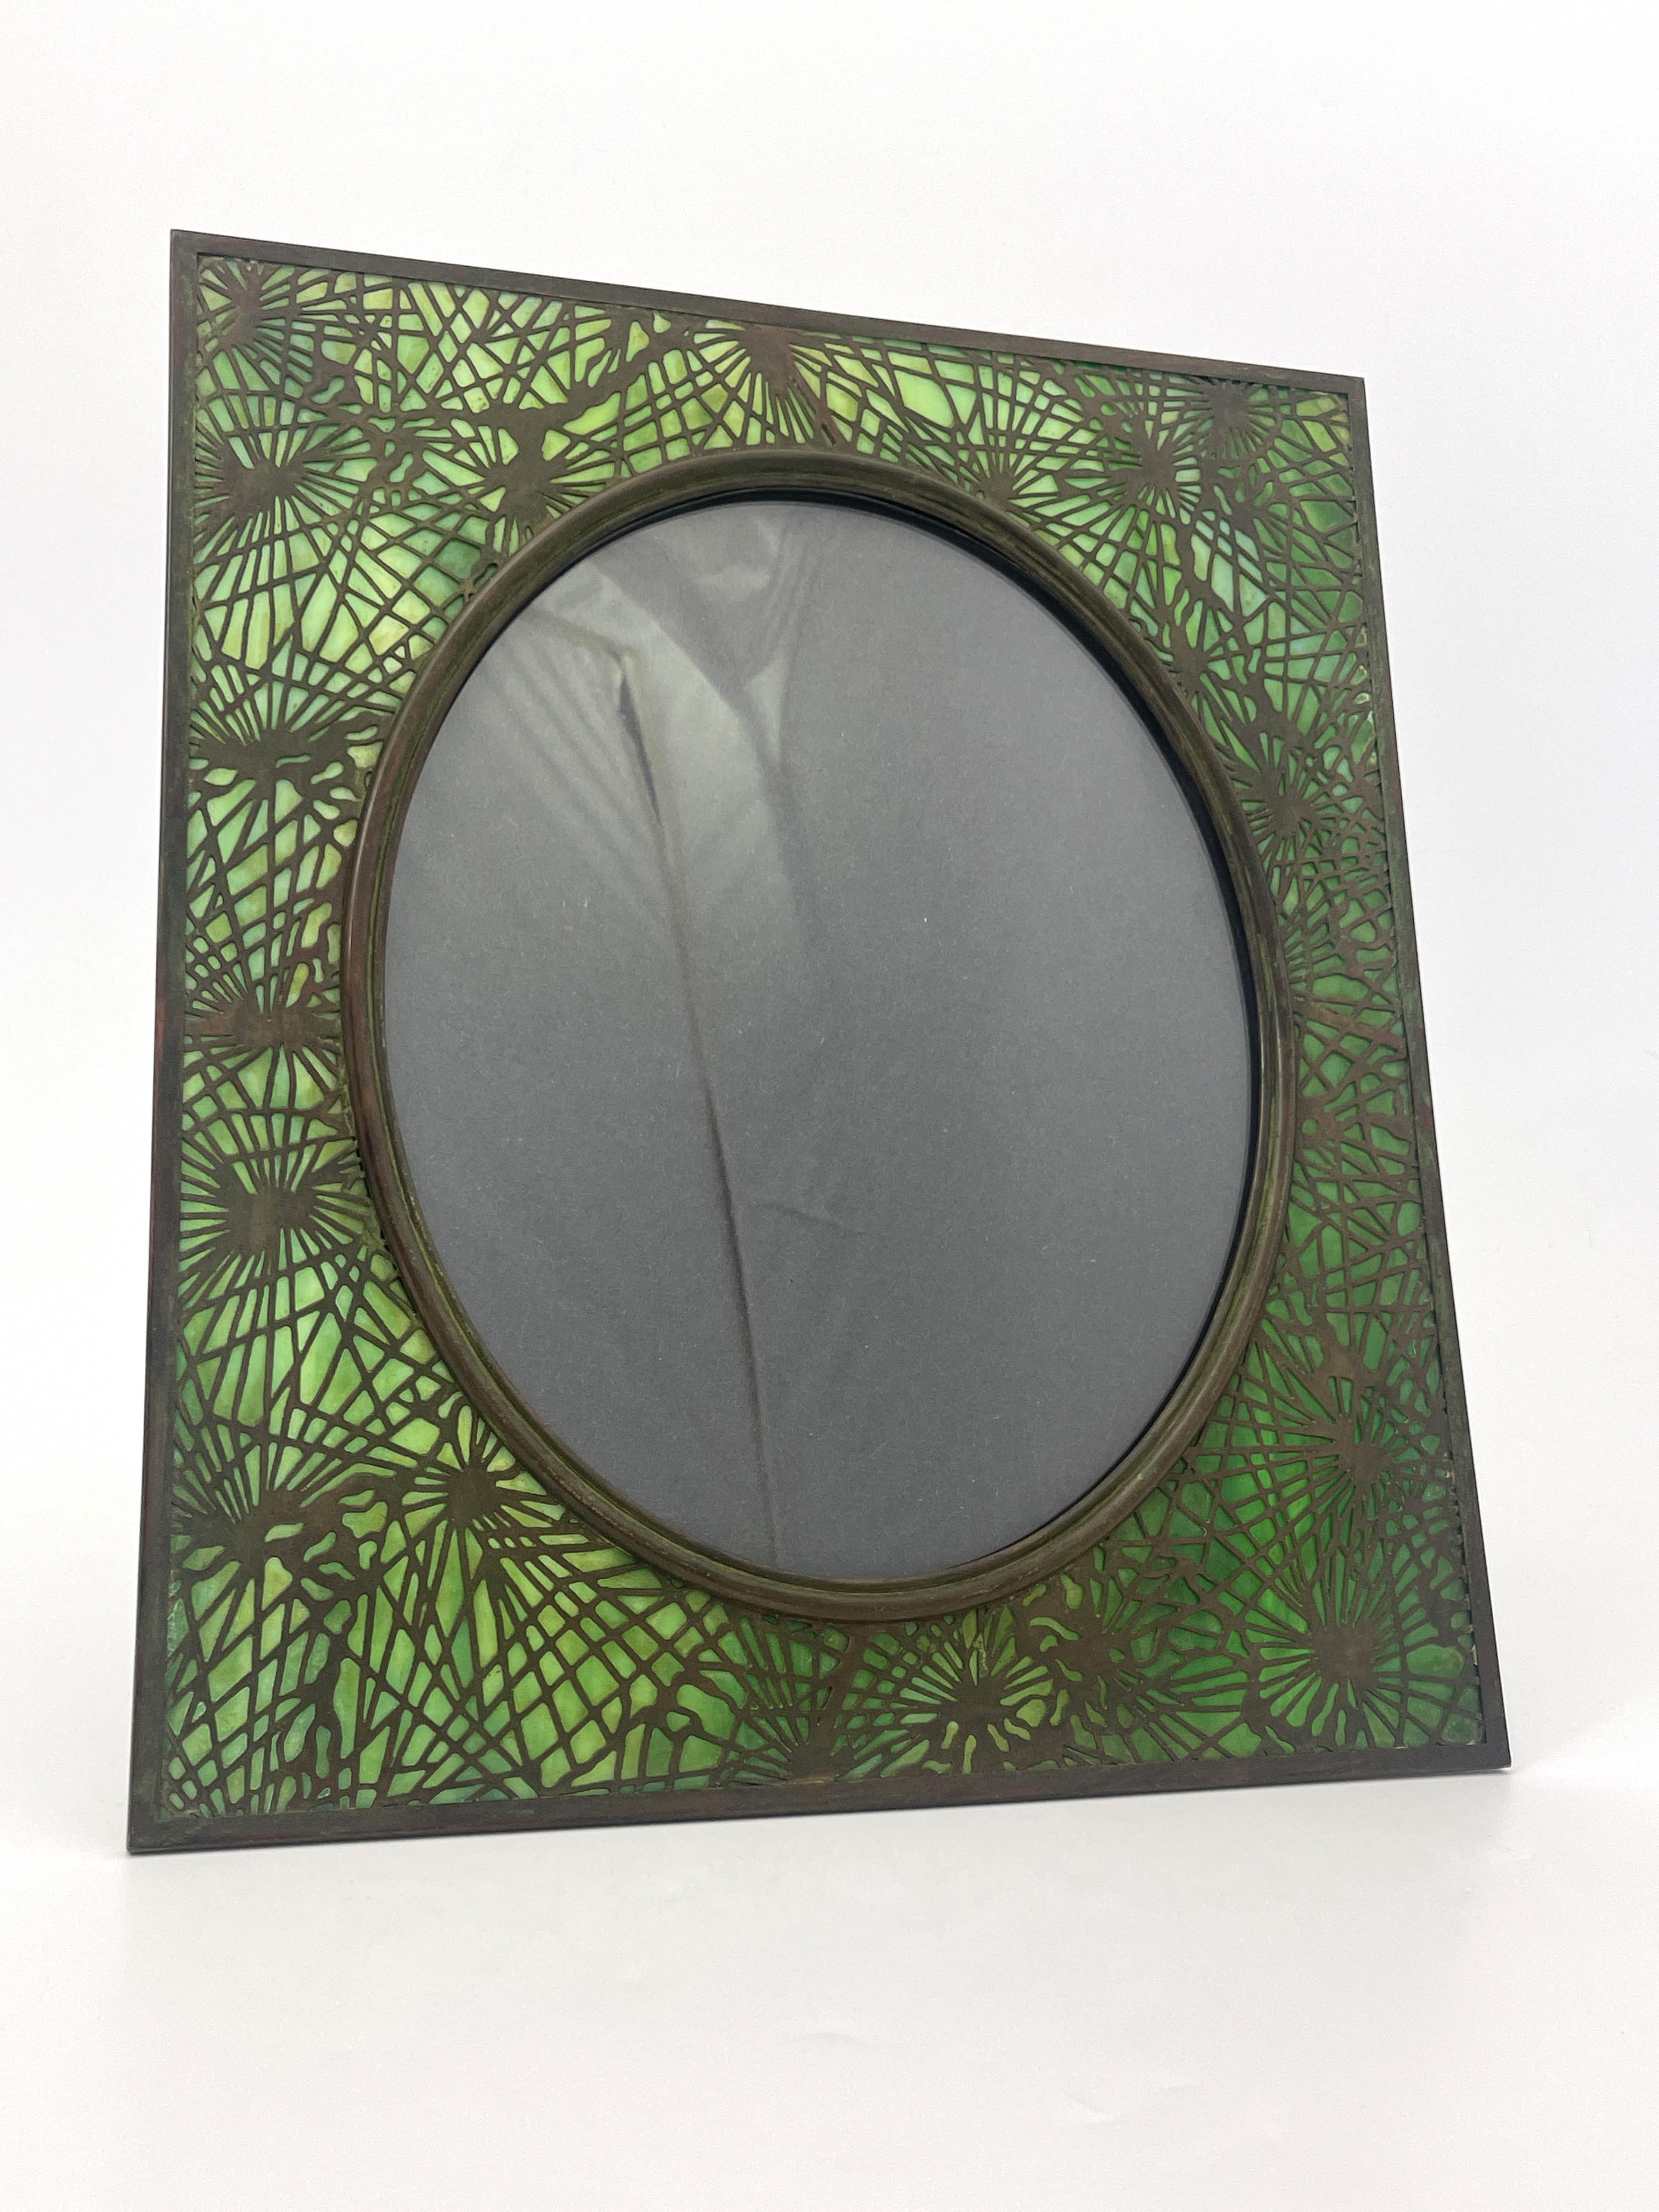 Tiffany Studios, an American Art Nouveau bronze and stained glass photo frame - Image 2 of 5